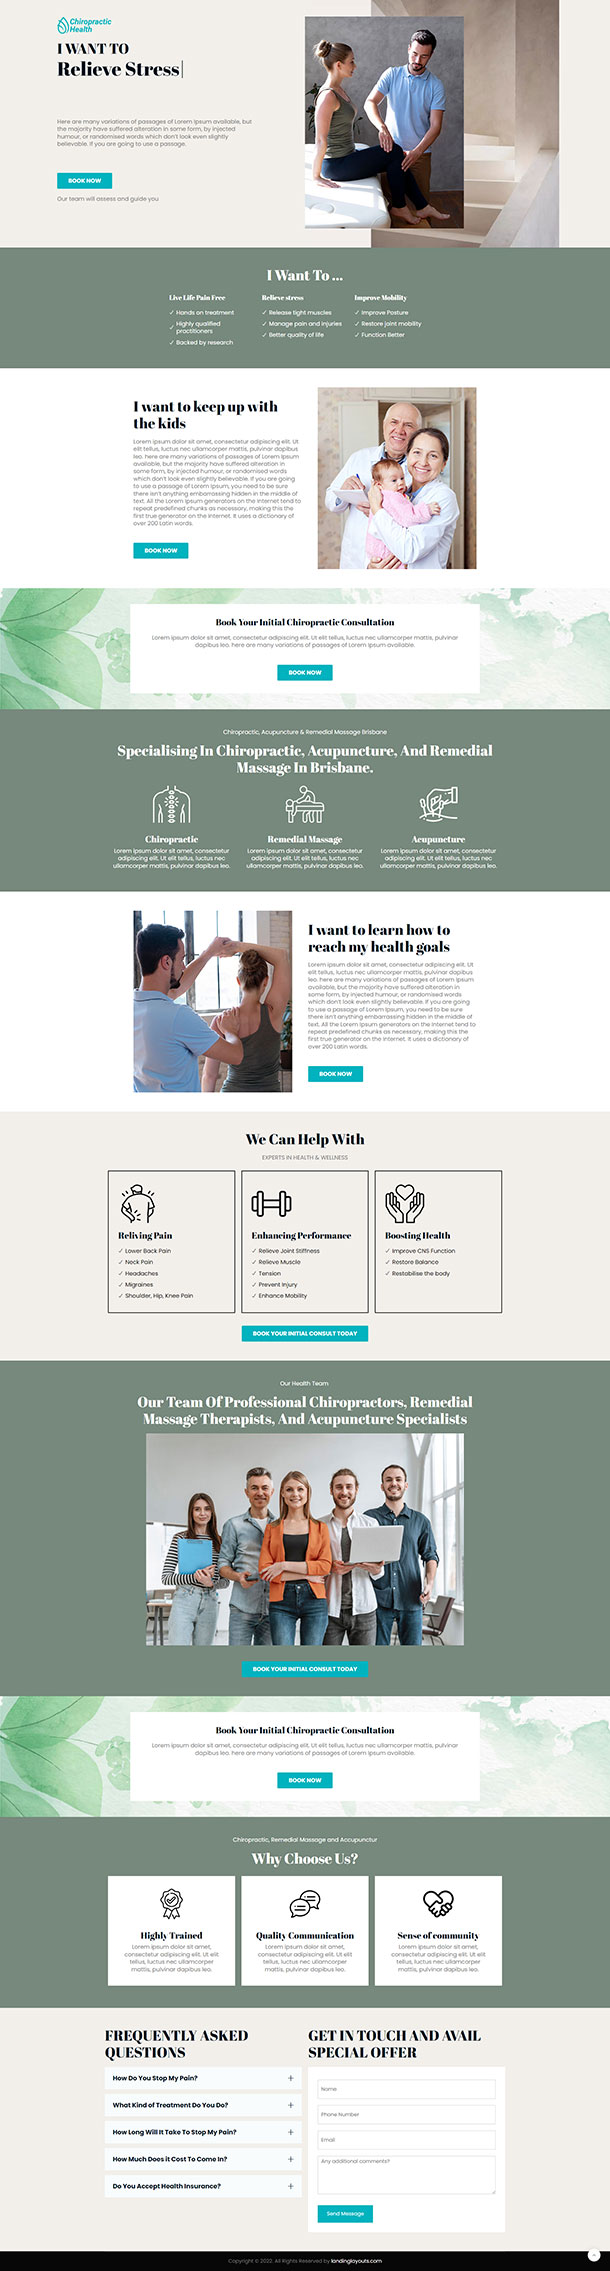 Chiropractic Lead Generation Landing Page